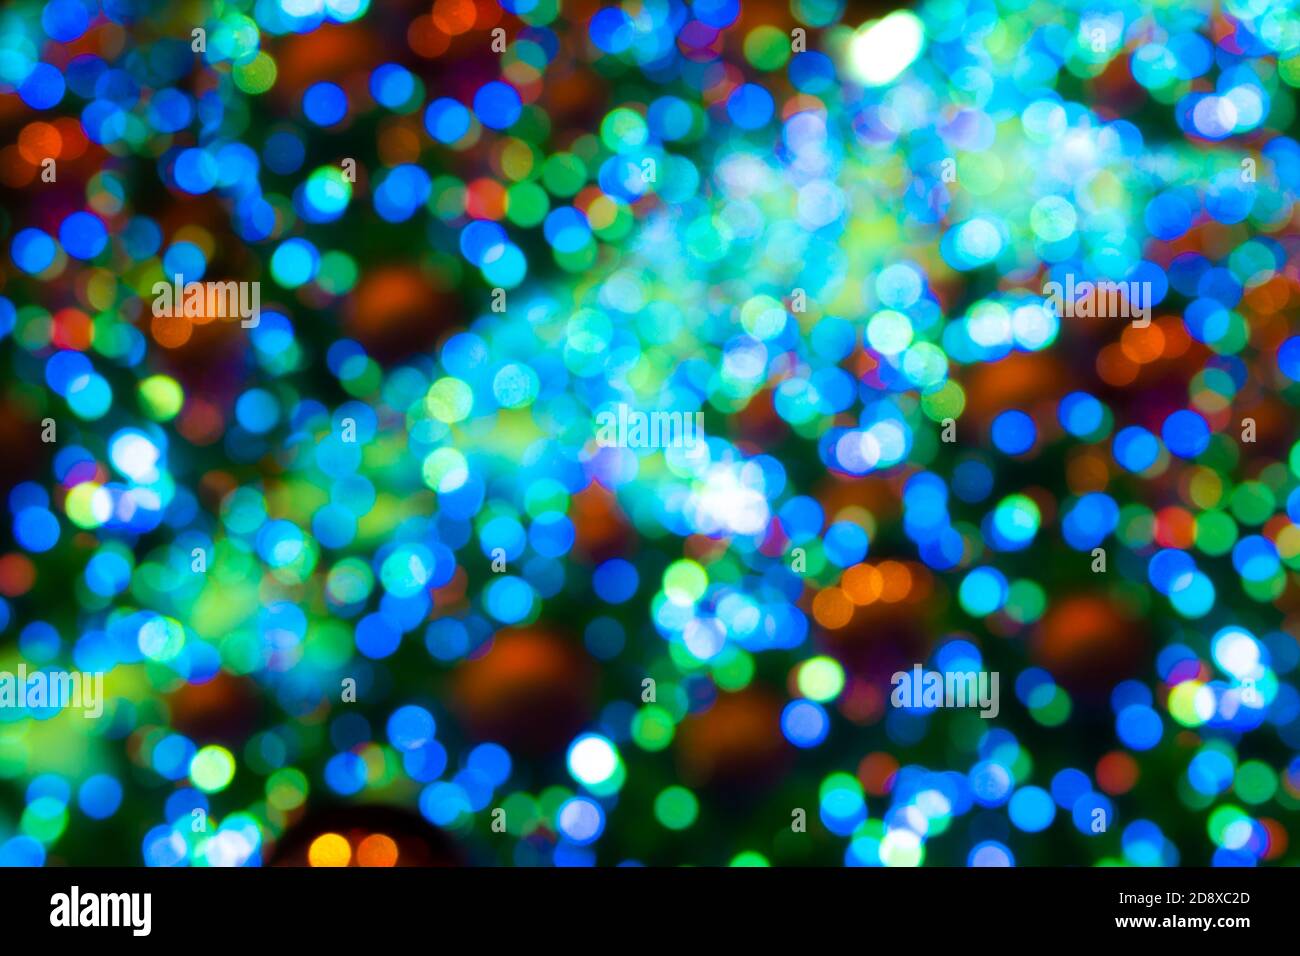 blurred colored spots of green hue, unfocused background Stock Photo